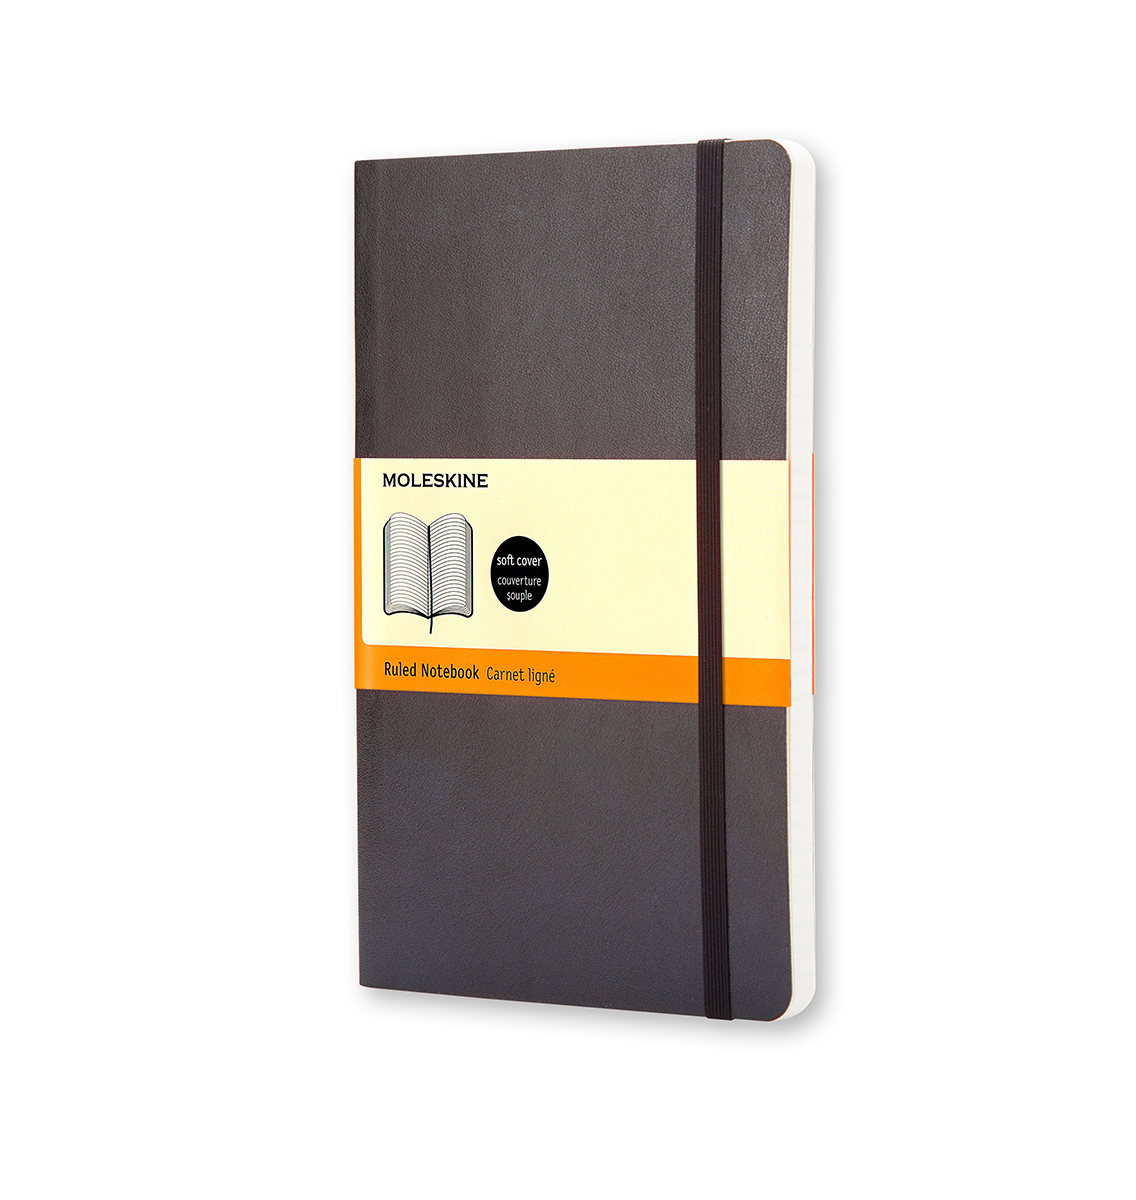 LARGE NOTEBOOK RULED BLACK SOFTCOVER